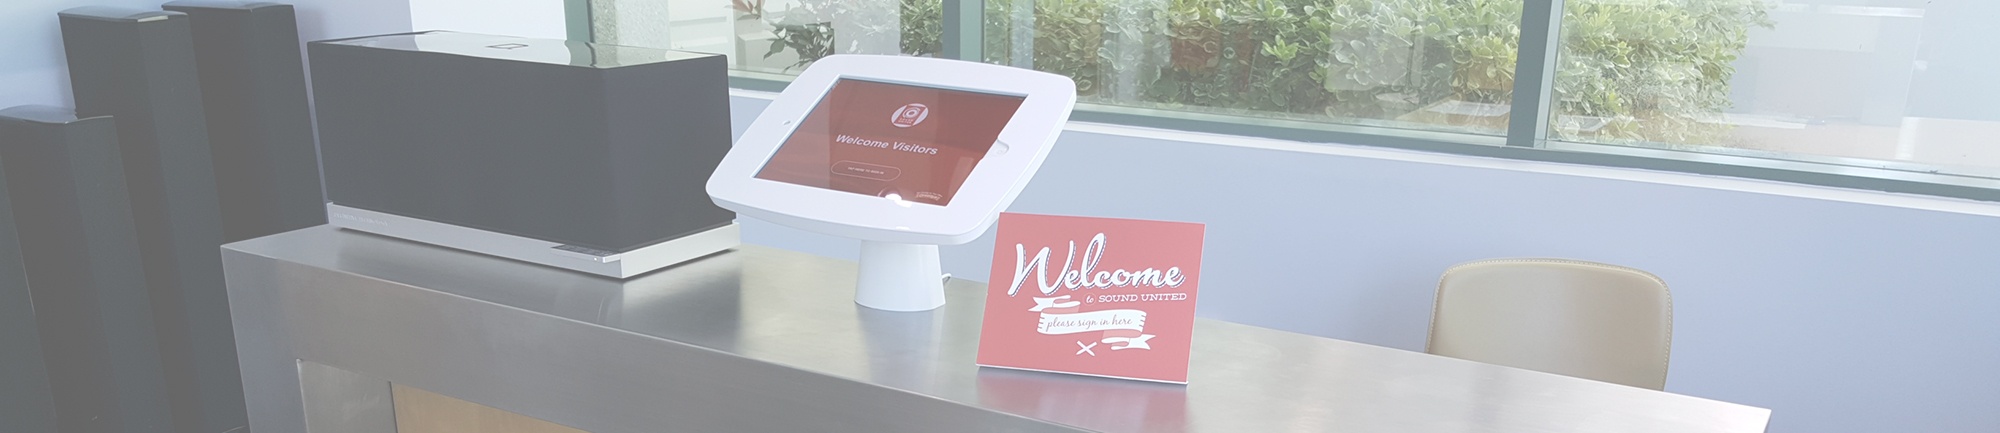 Visitor registration app welcomes visitors to a high tech company's reception area